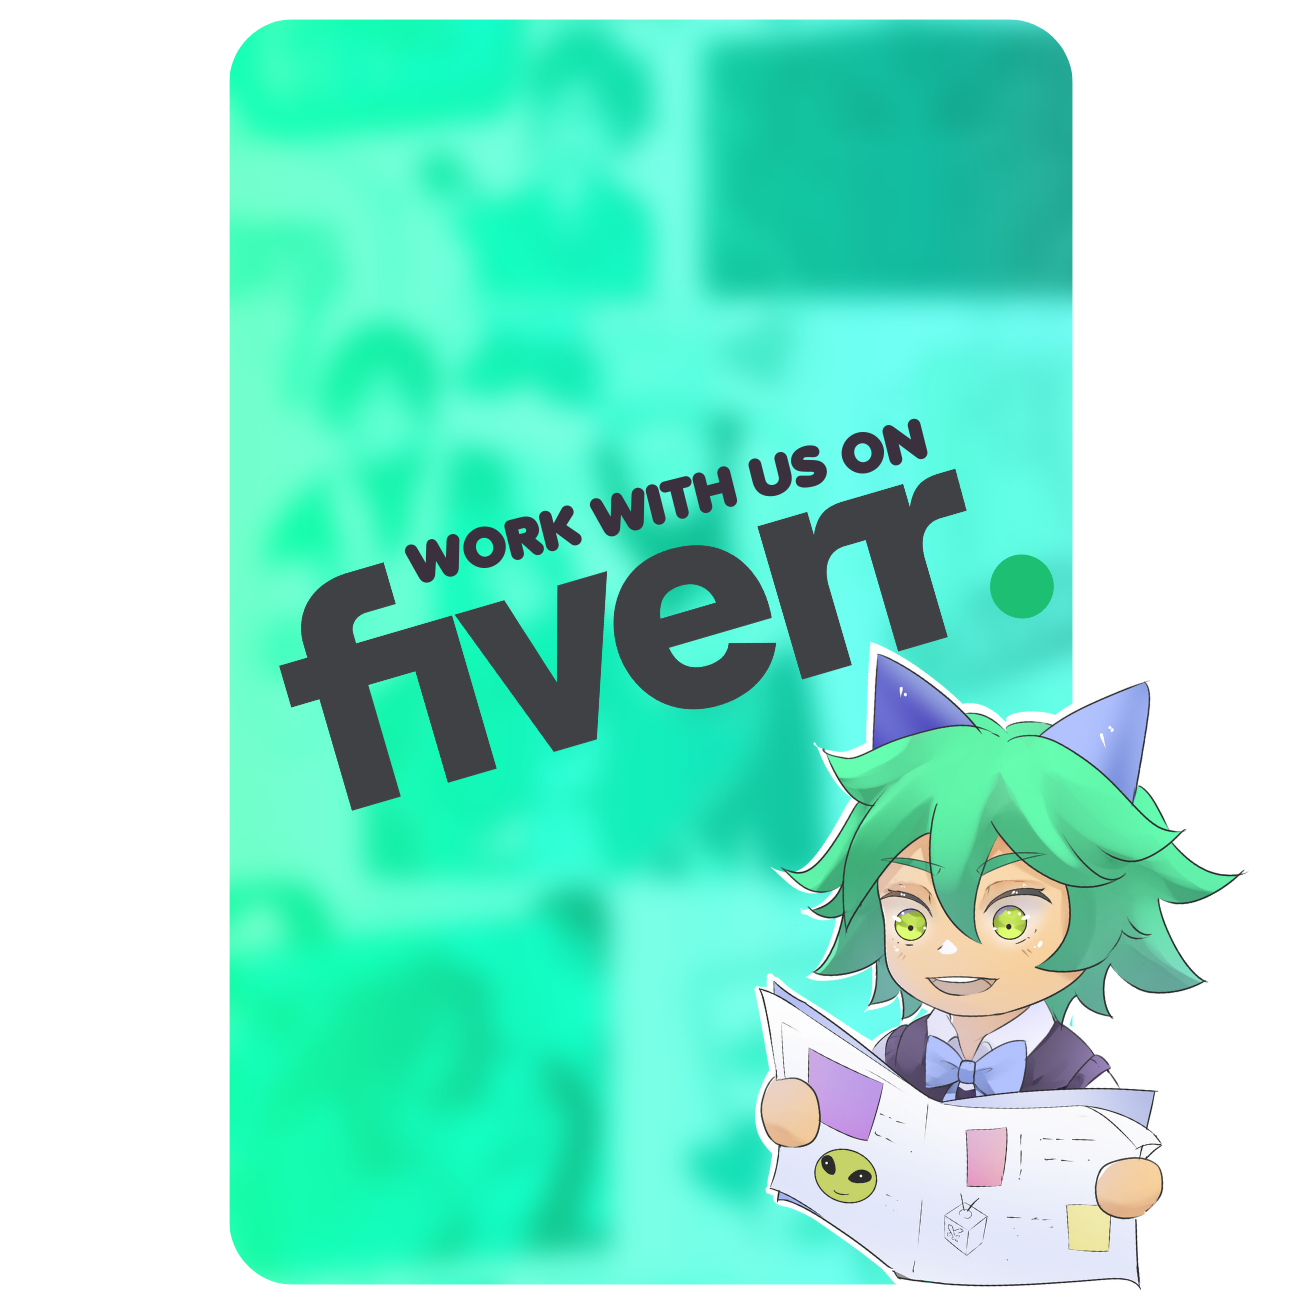 All Ages of Geek Fiverr Ad Vertical